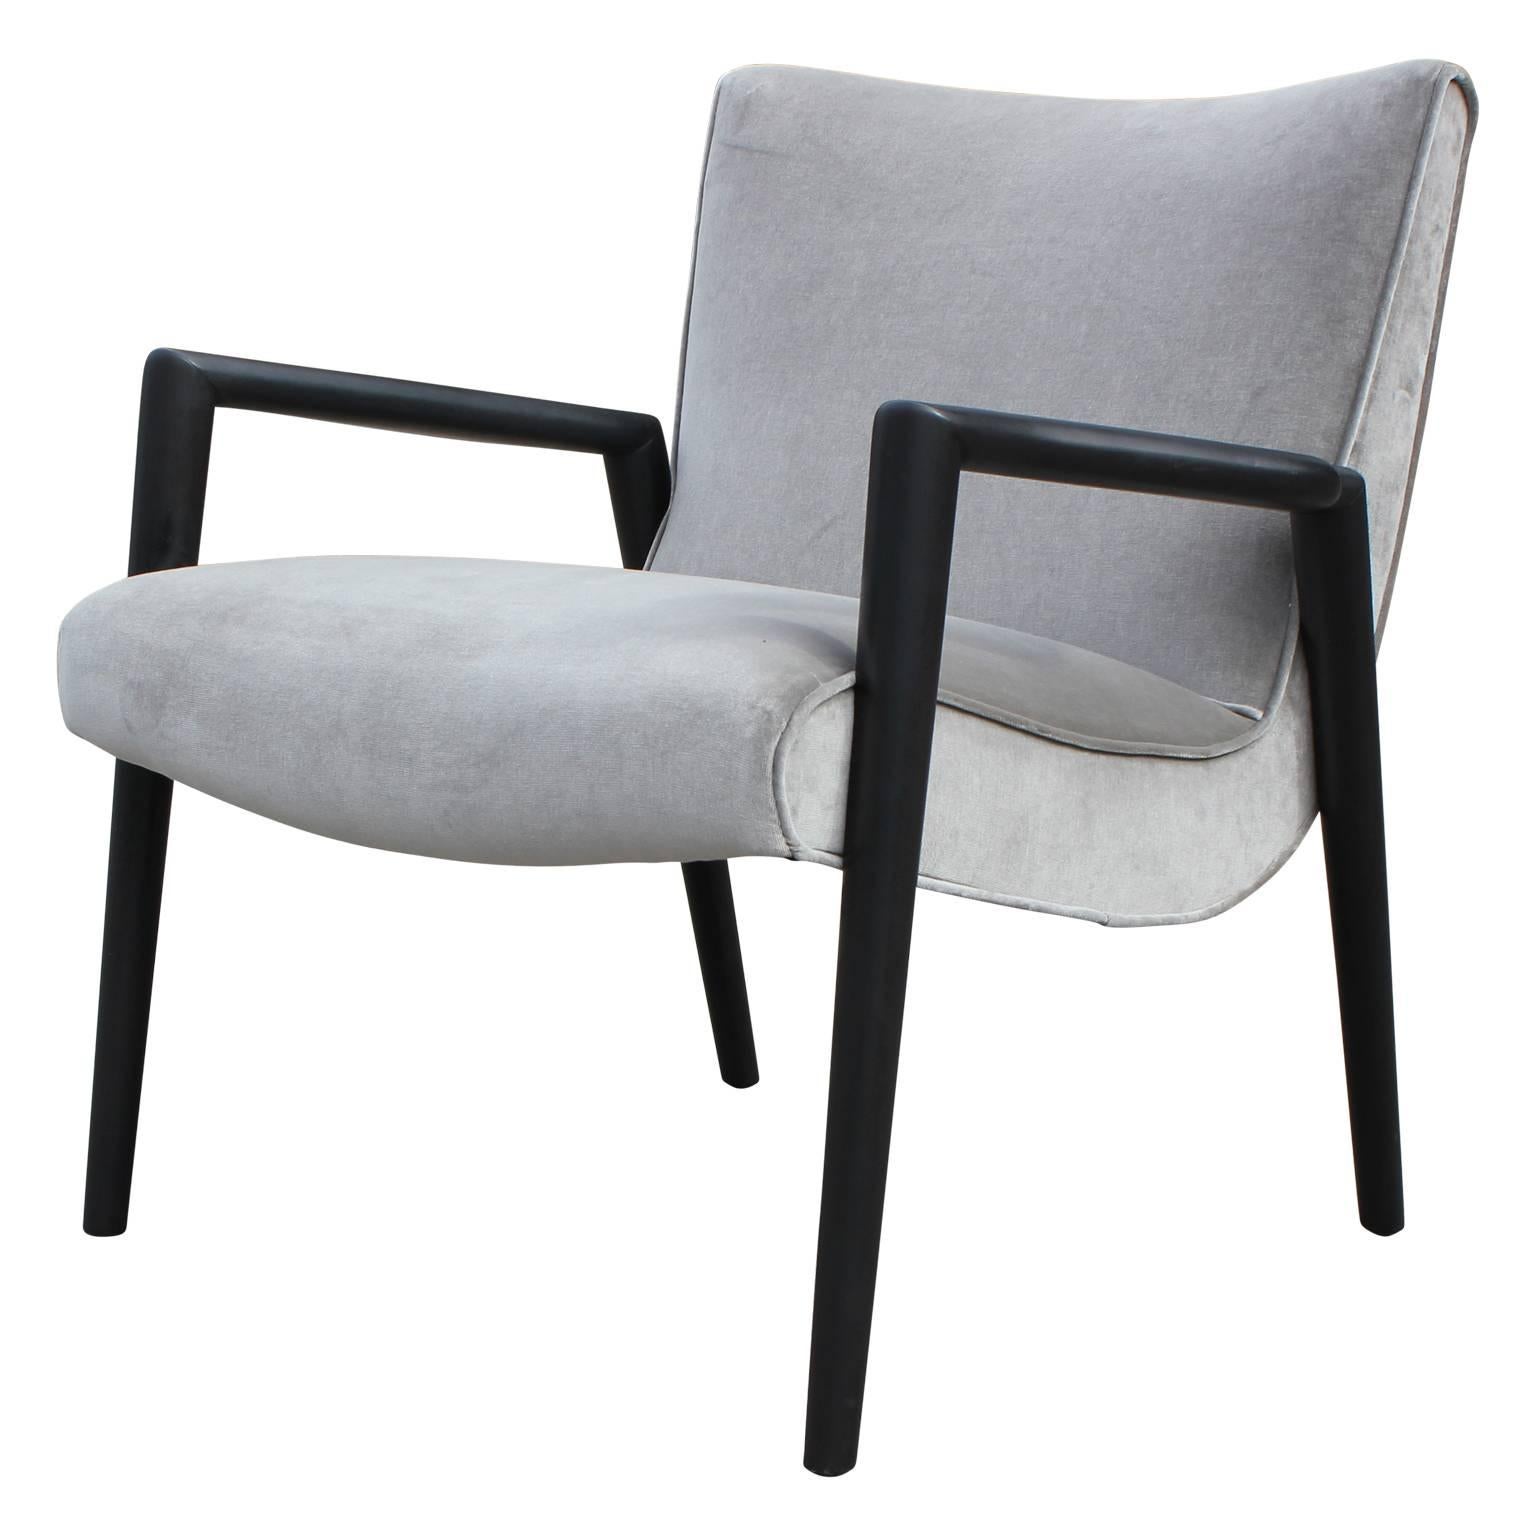 Pair of gorgeous lounge chairs in the style of Paul McCobb or Widdicomb. These have been freshly upholstered in a nice silver grey velvet and stained in a nice charcoal. Perfect addition to any mod or mid-mod space.